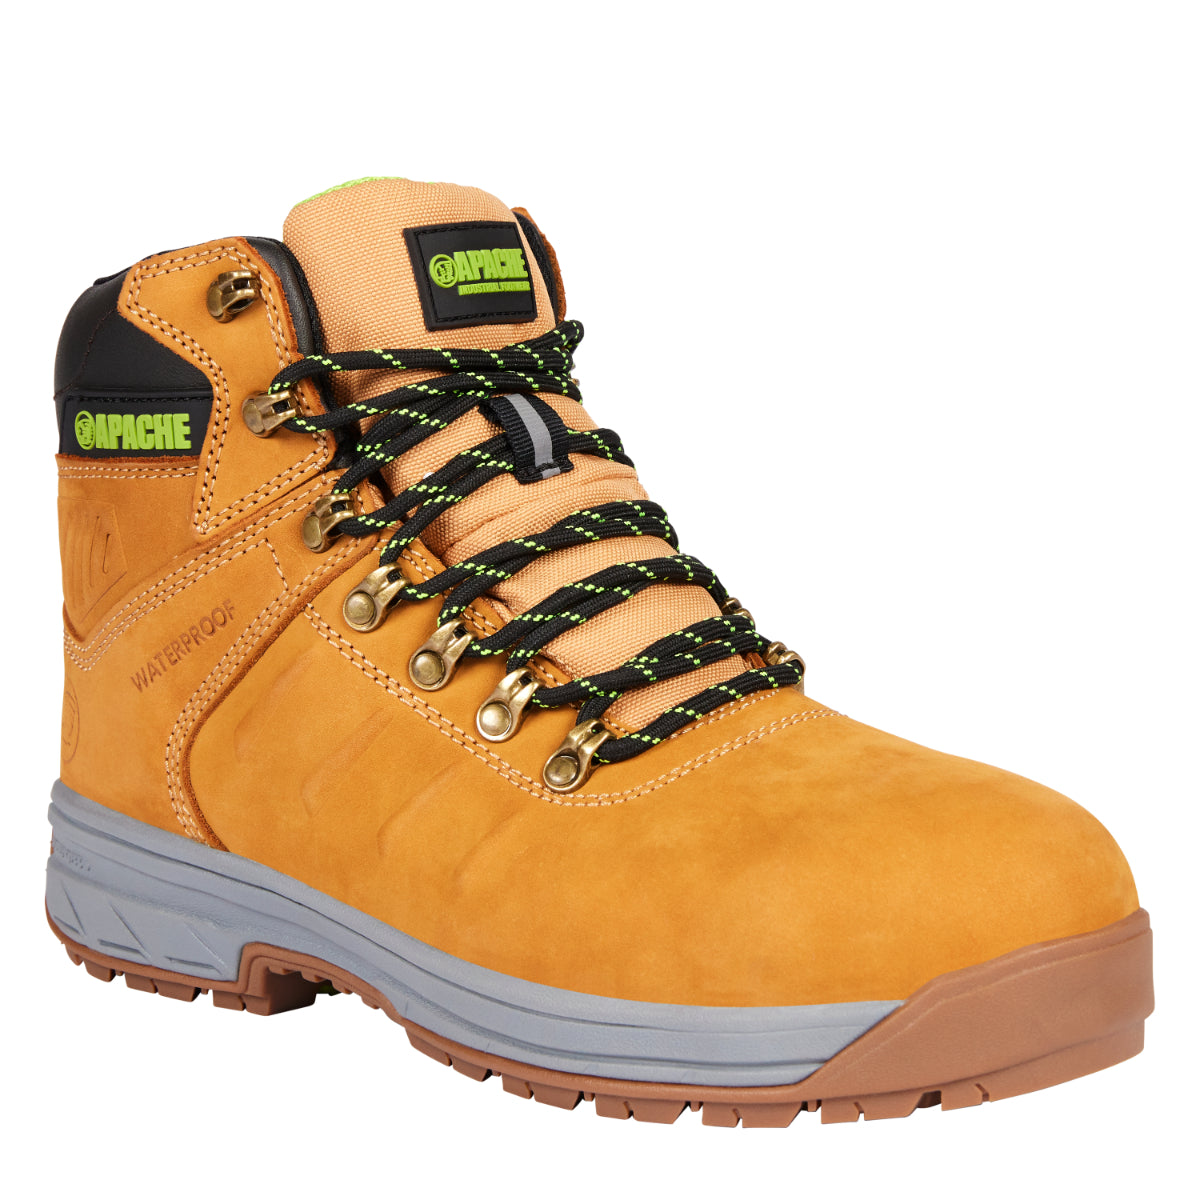 Apache Wheat Leather Waterproof Safety Boot - XTS Outsole